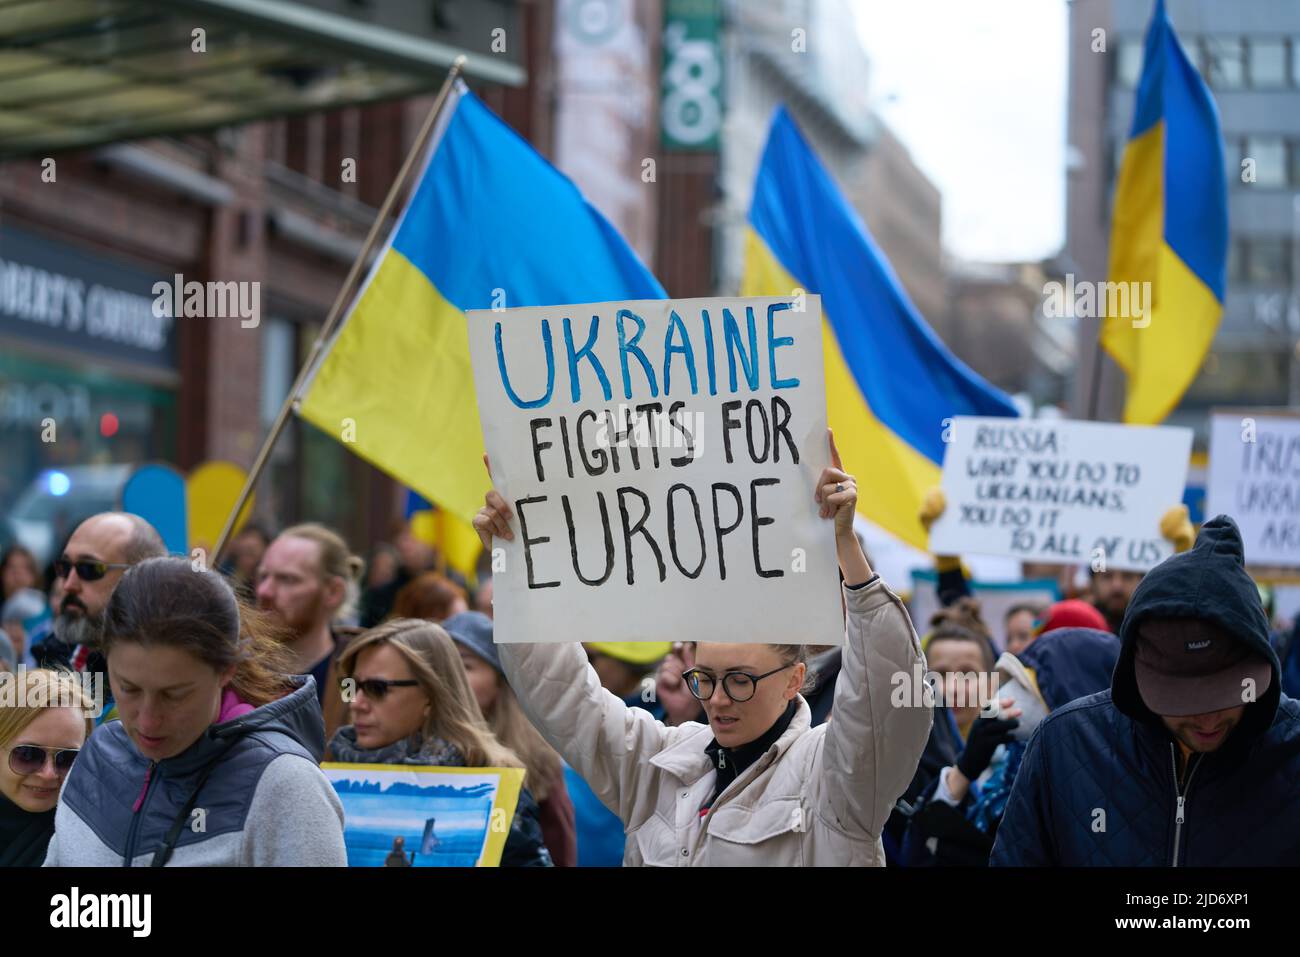 Helsinki, Finland - April 23, 2022: Demonstrator in a rally against Russia’s military aggression and occupation of Ukraine carrying Ukraine Fights For Stock Photo